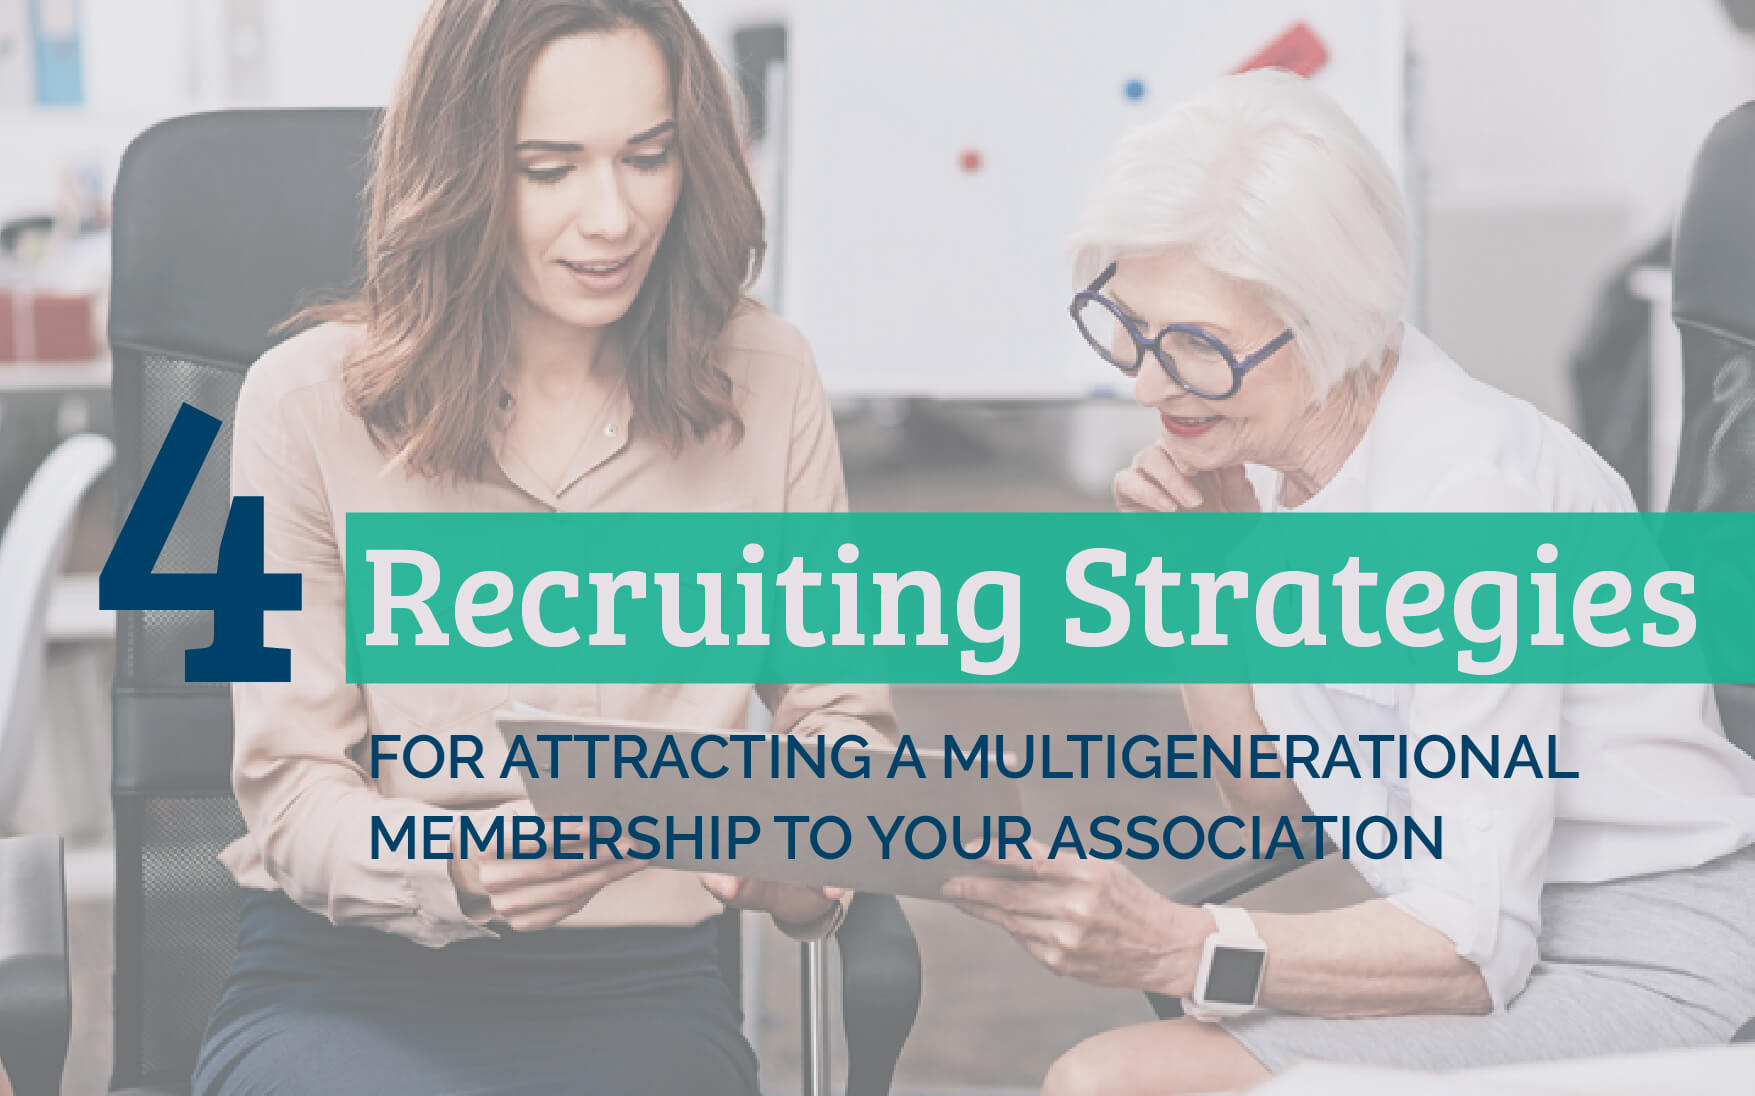 4 Recruiting Strategies for Attracting a Multigenerational Membership to Your Association